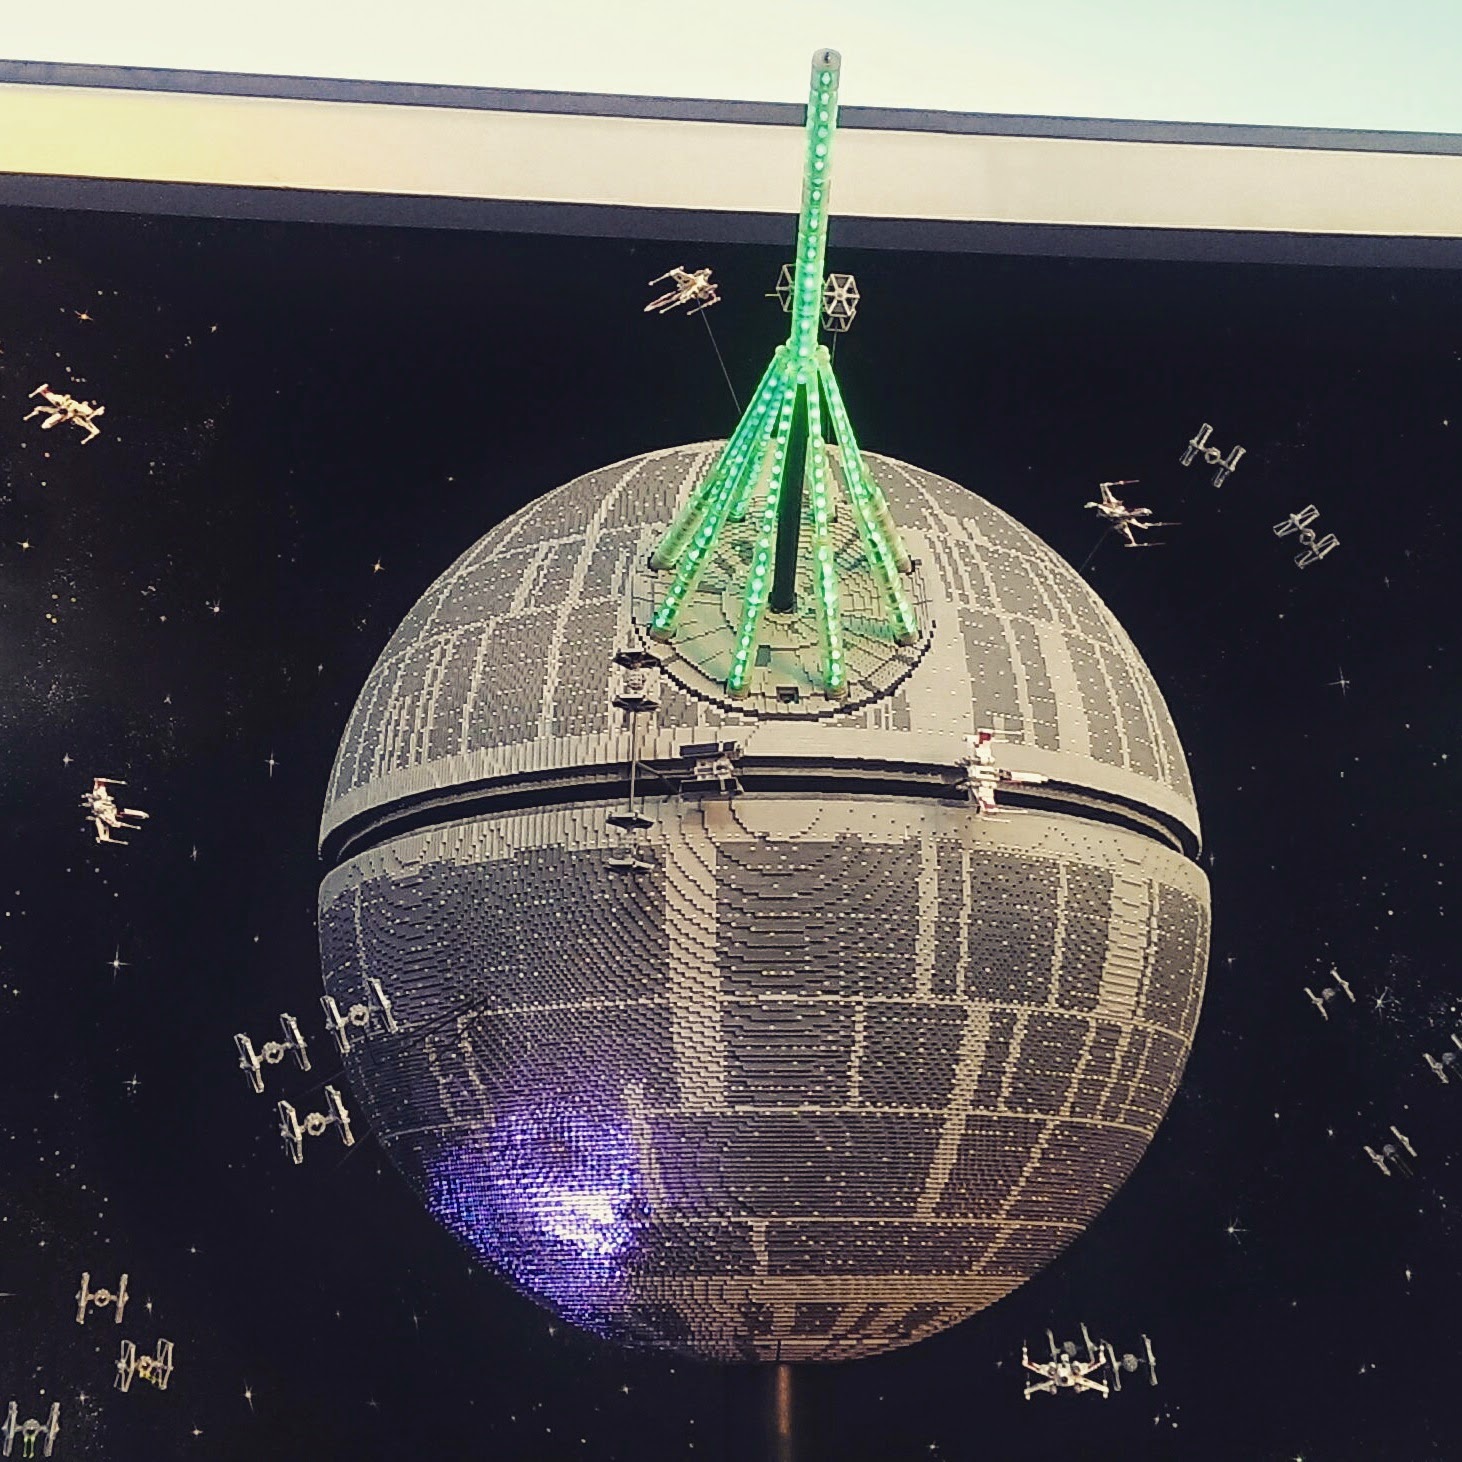 Death%2BStar%2BLego%2BLand Things To Do At Legoland - See Legoland Star Wars Miniland Death Star Model Display